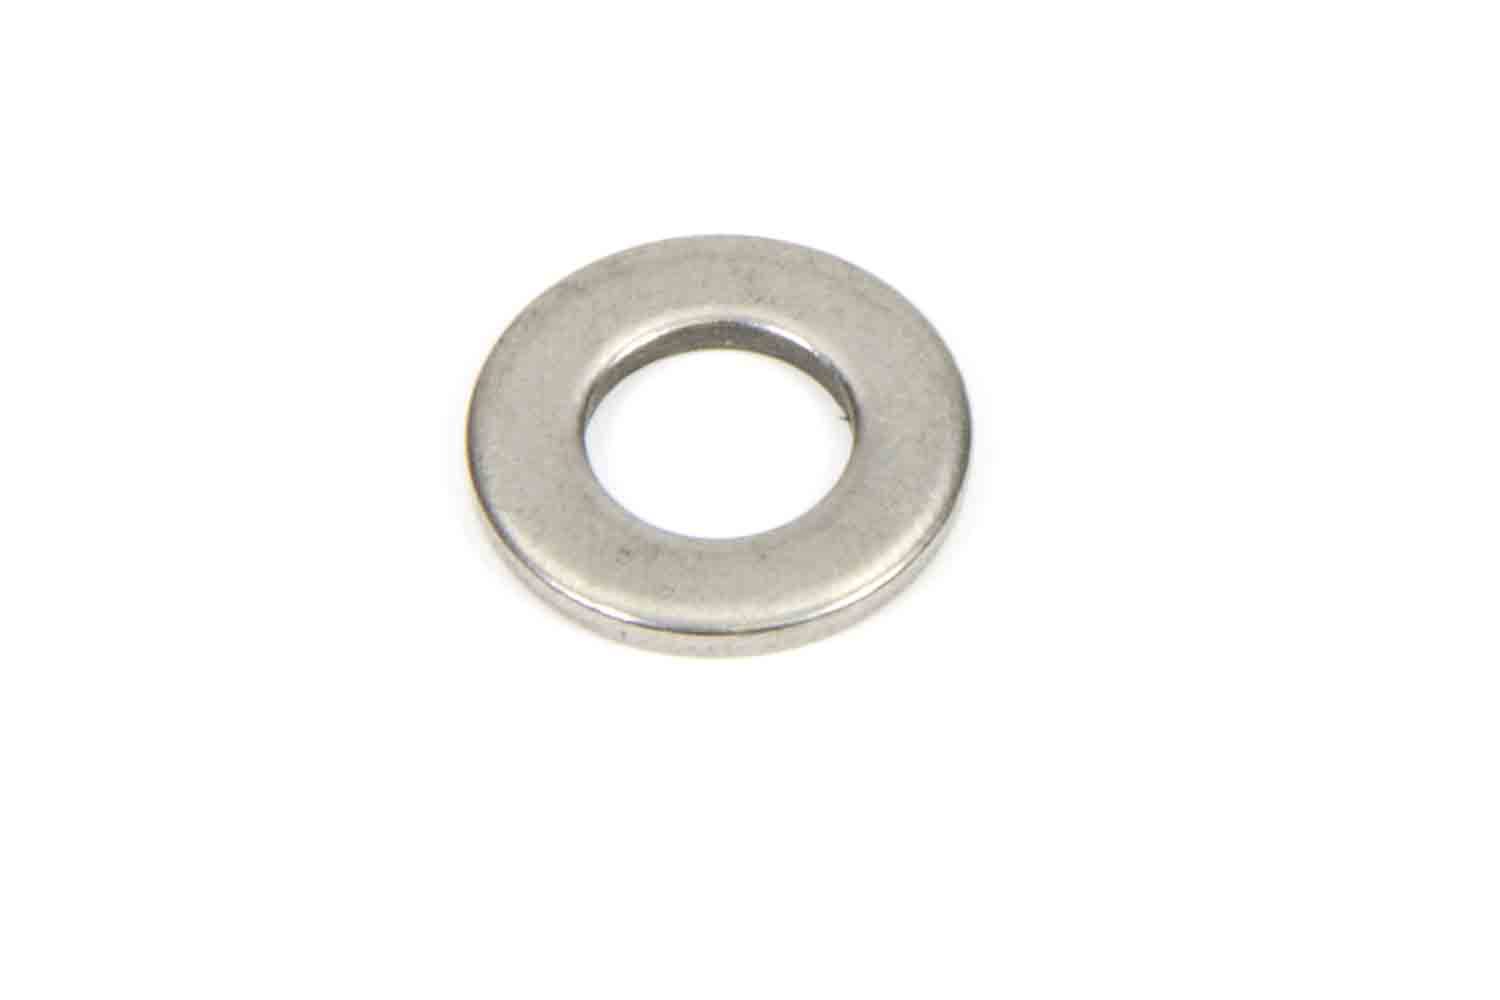 ARP, Stainless Steel Flat Washer - 5/16 ID x 5/8 OD (1)